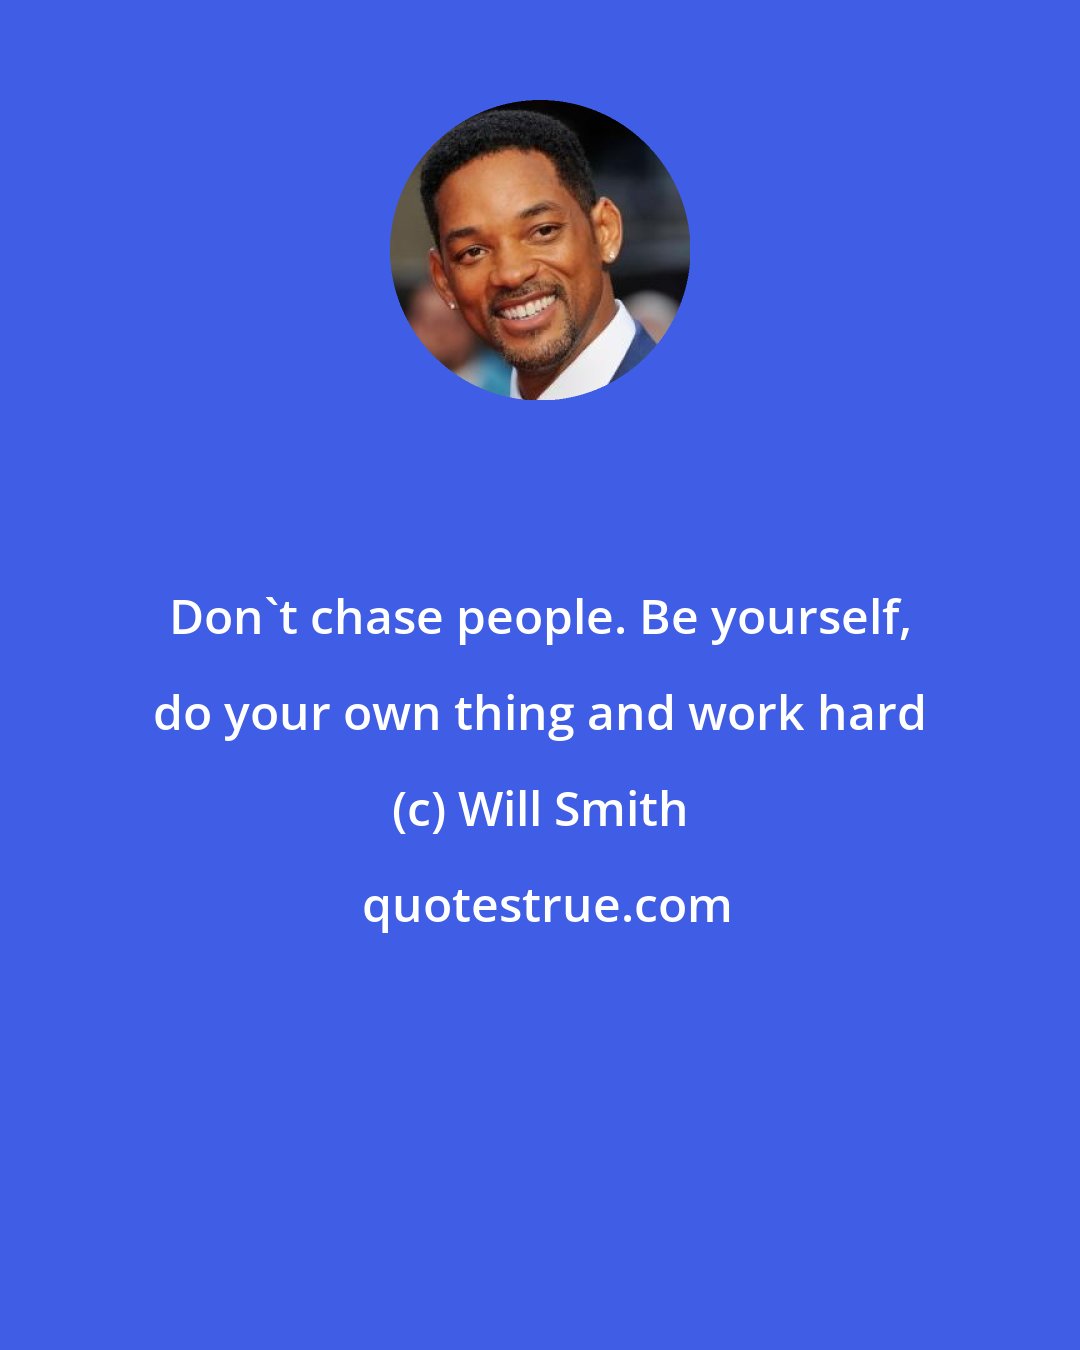 Will Smith: Don't chase people. Be yourself, do your own thing and work hard